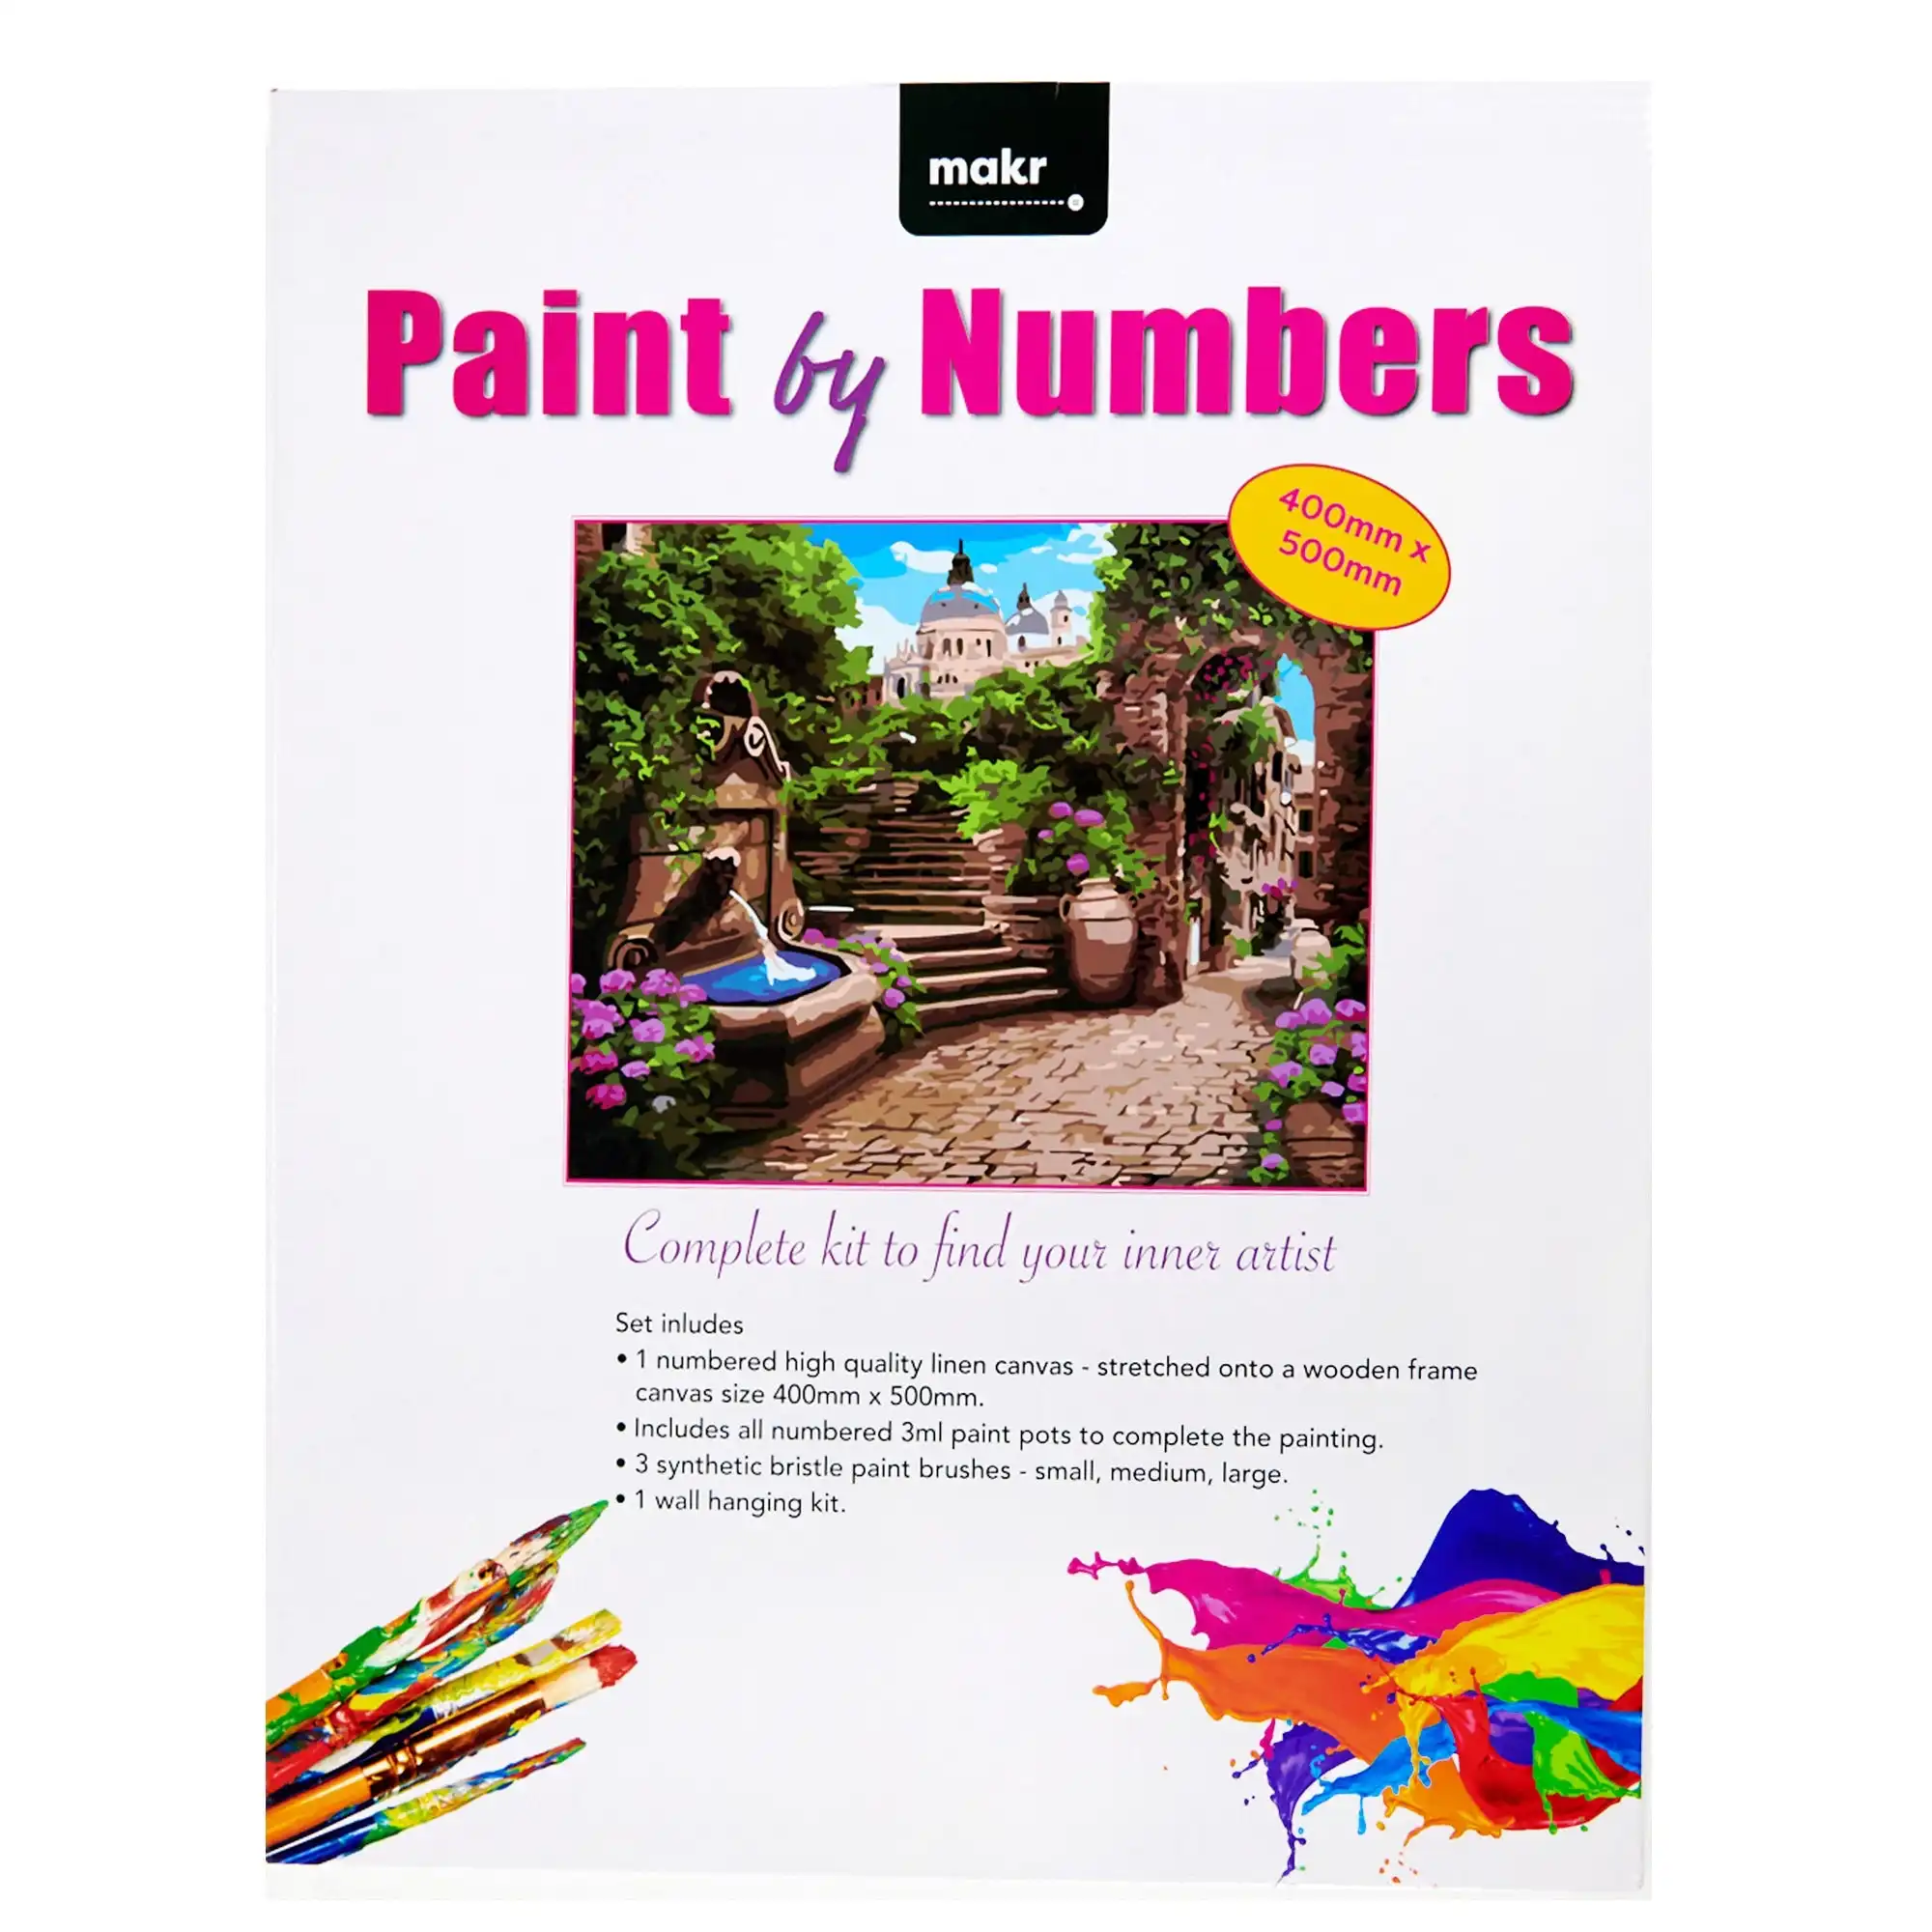 Best in Show Paint by Number Kit